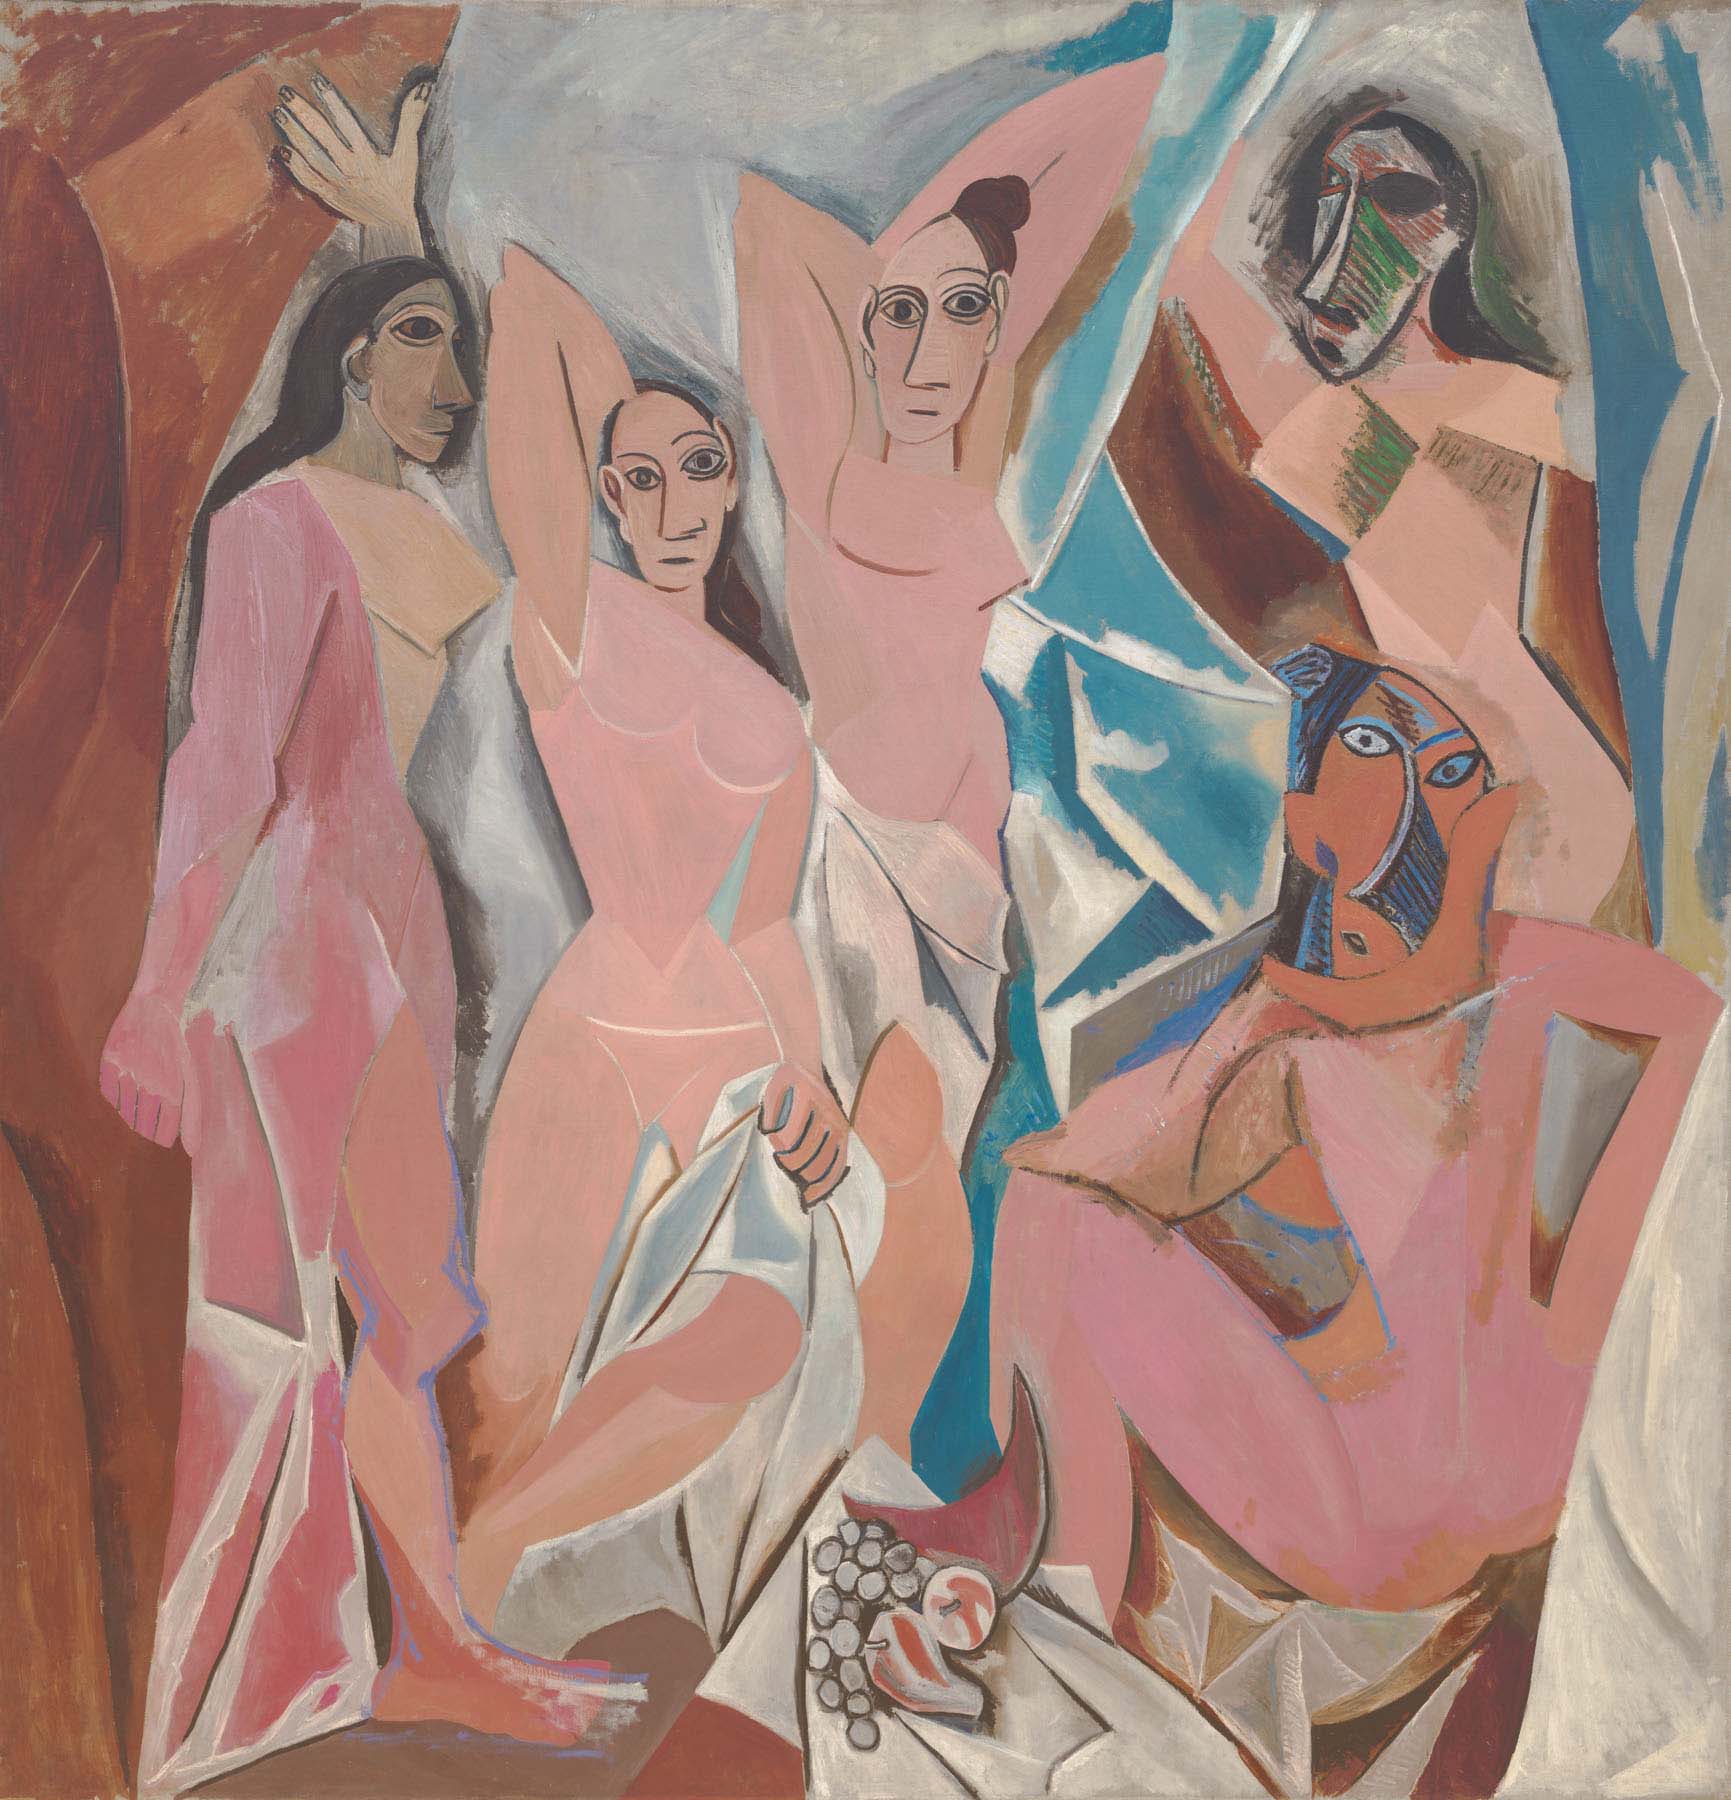 An abstract painting of five nude women depicted in sharp angles with mask-like faces.